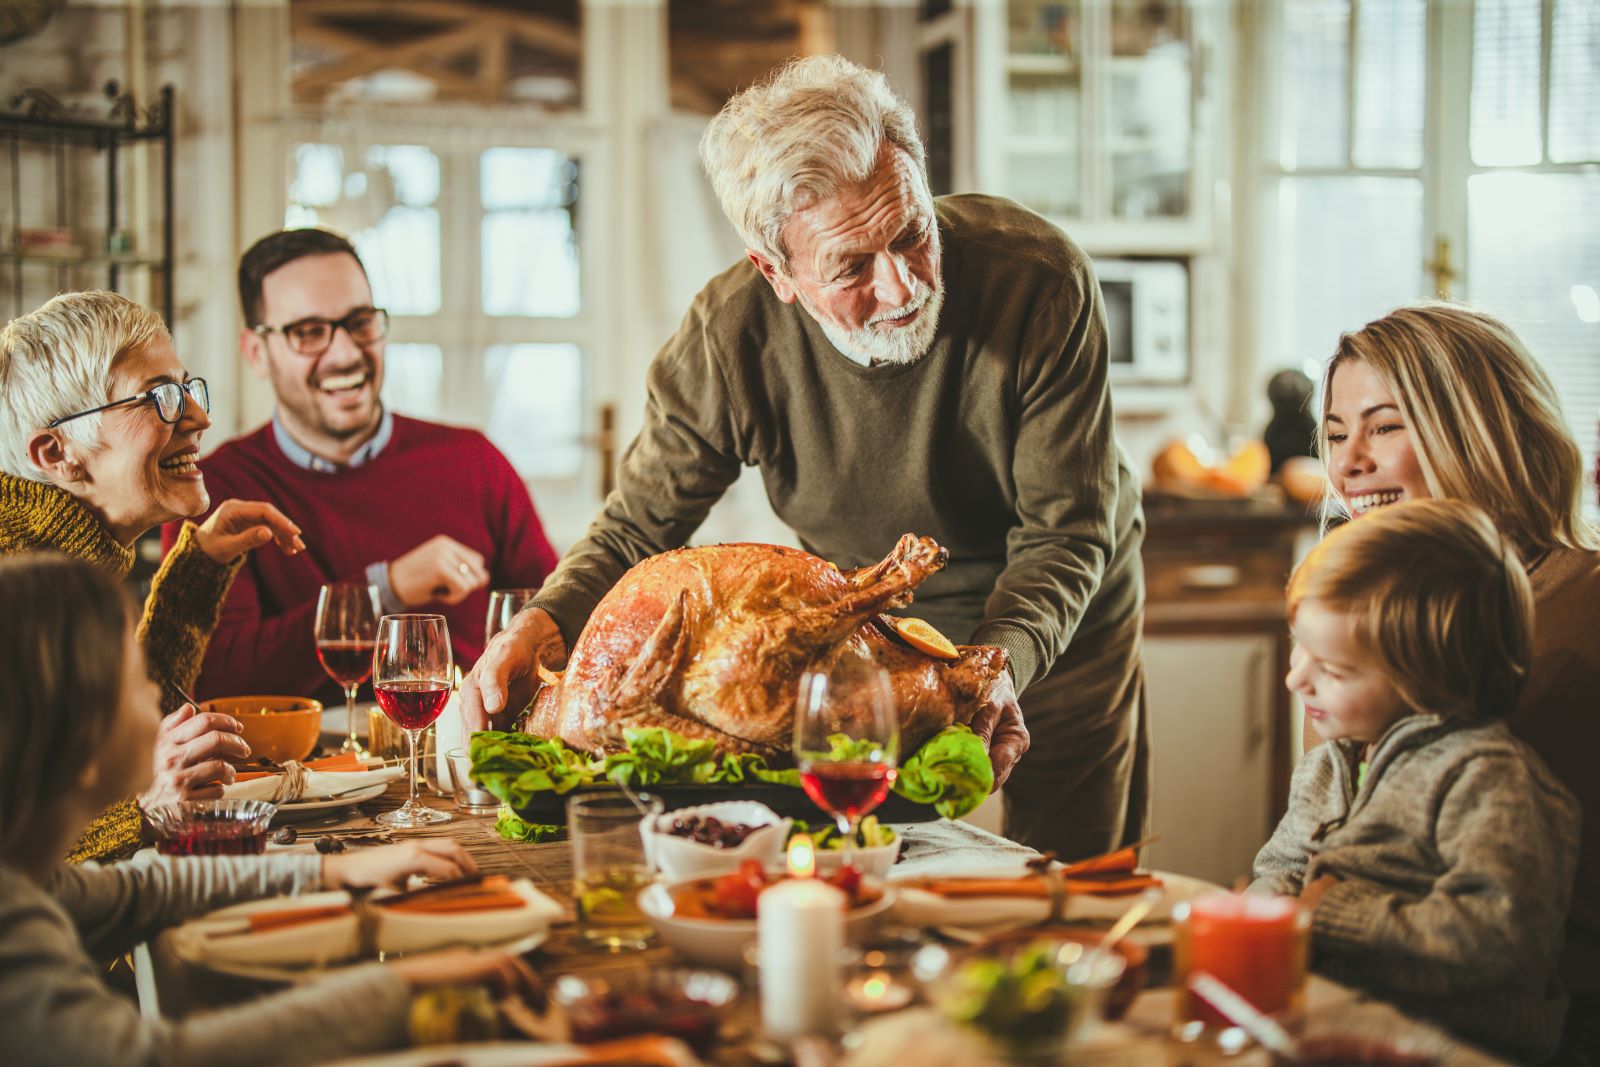 A Dietitian's Guide to a Happy (and Healthy) Thanksgiving